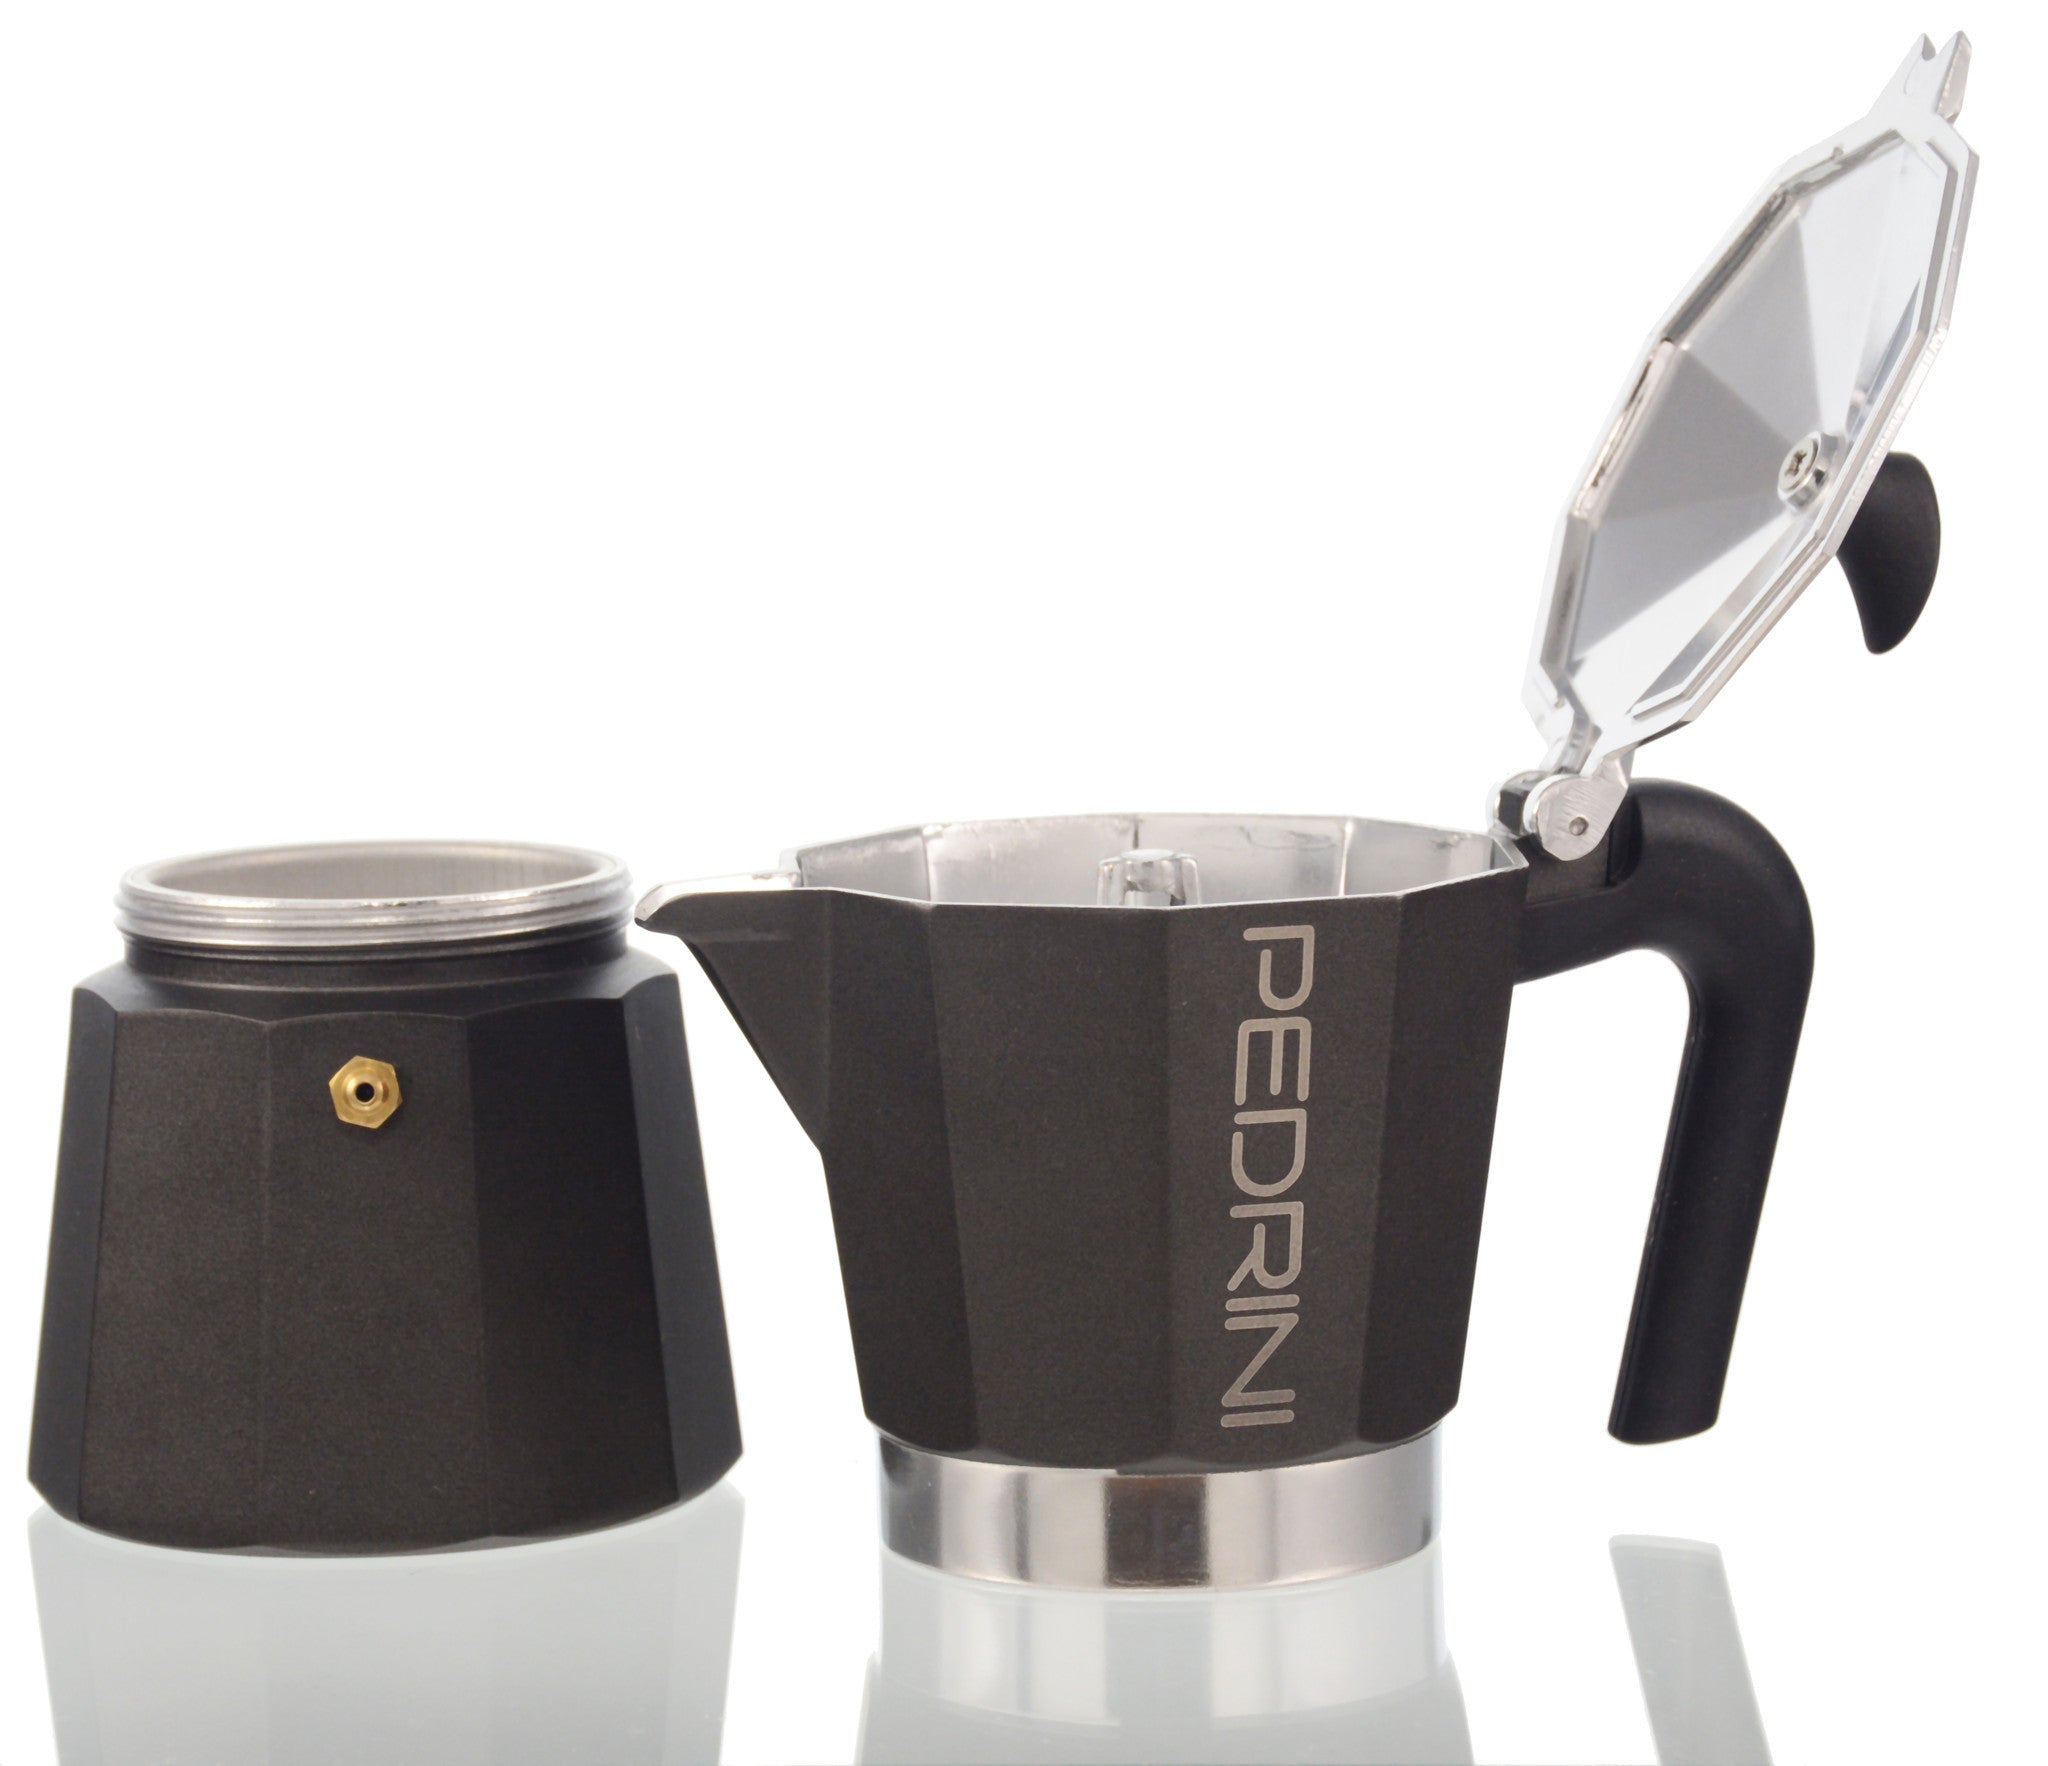 TXON Stores Your choice for home products.. Pedrini - Pressure Steel Coffee  Maker - 13 x 9 x 18 Cm